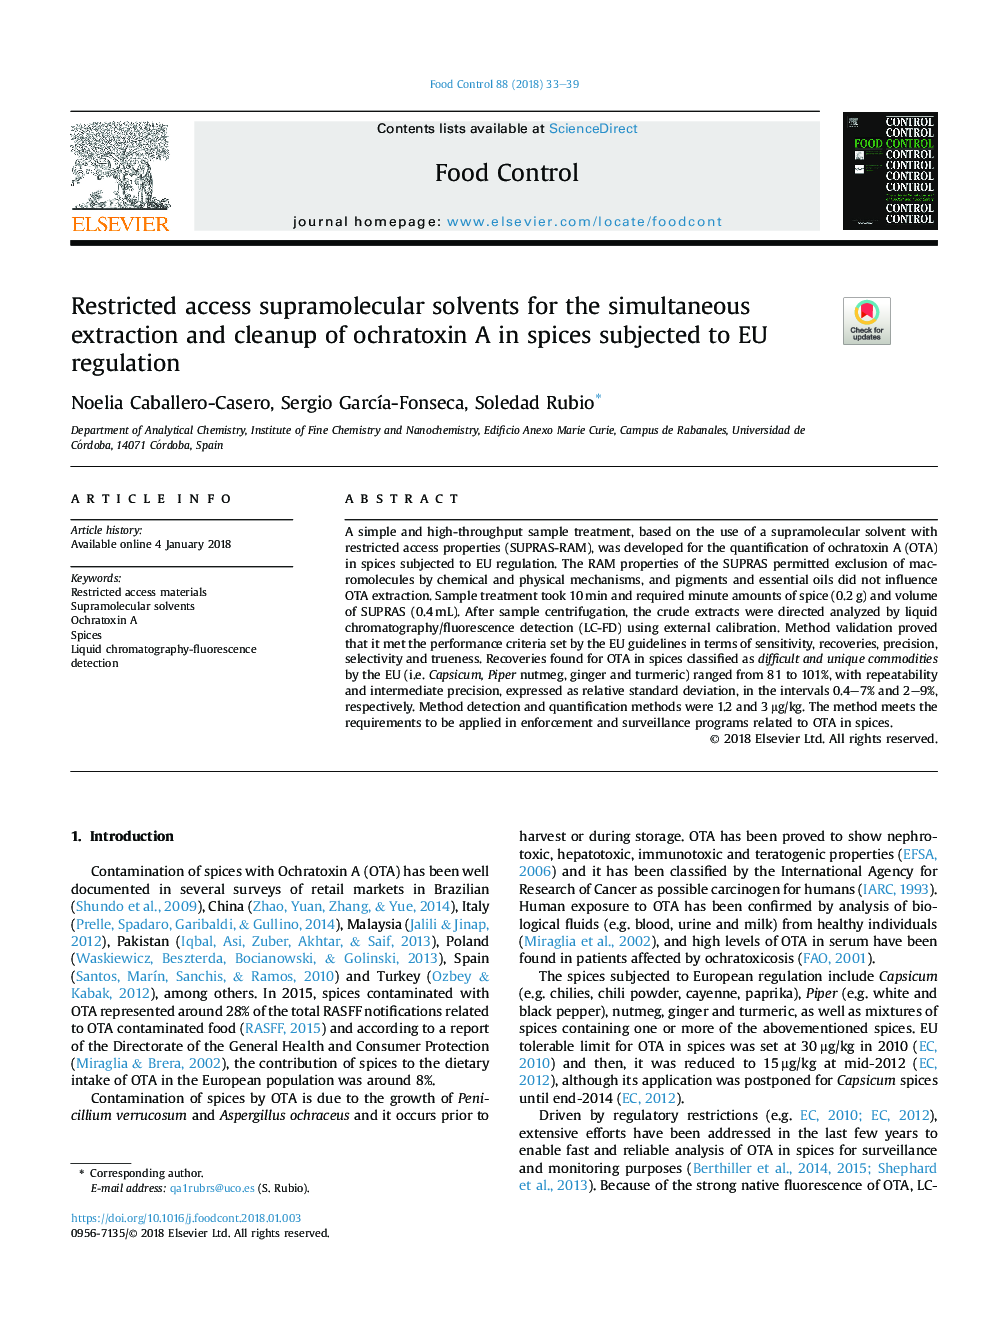 Restricted access supramolecular solvents for the simultaneous extraction and cleanup of ochratoxin A in spices subjected to EU regulation